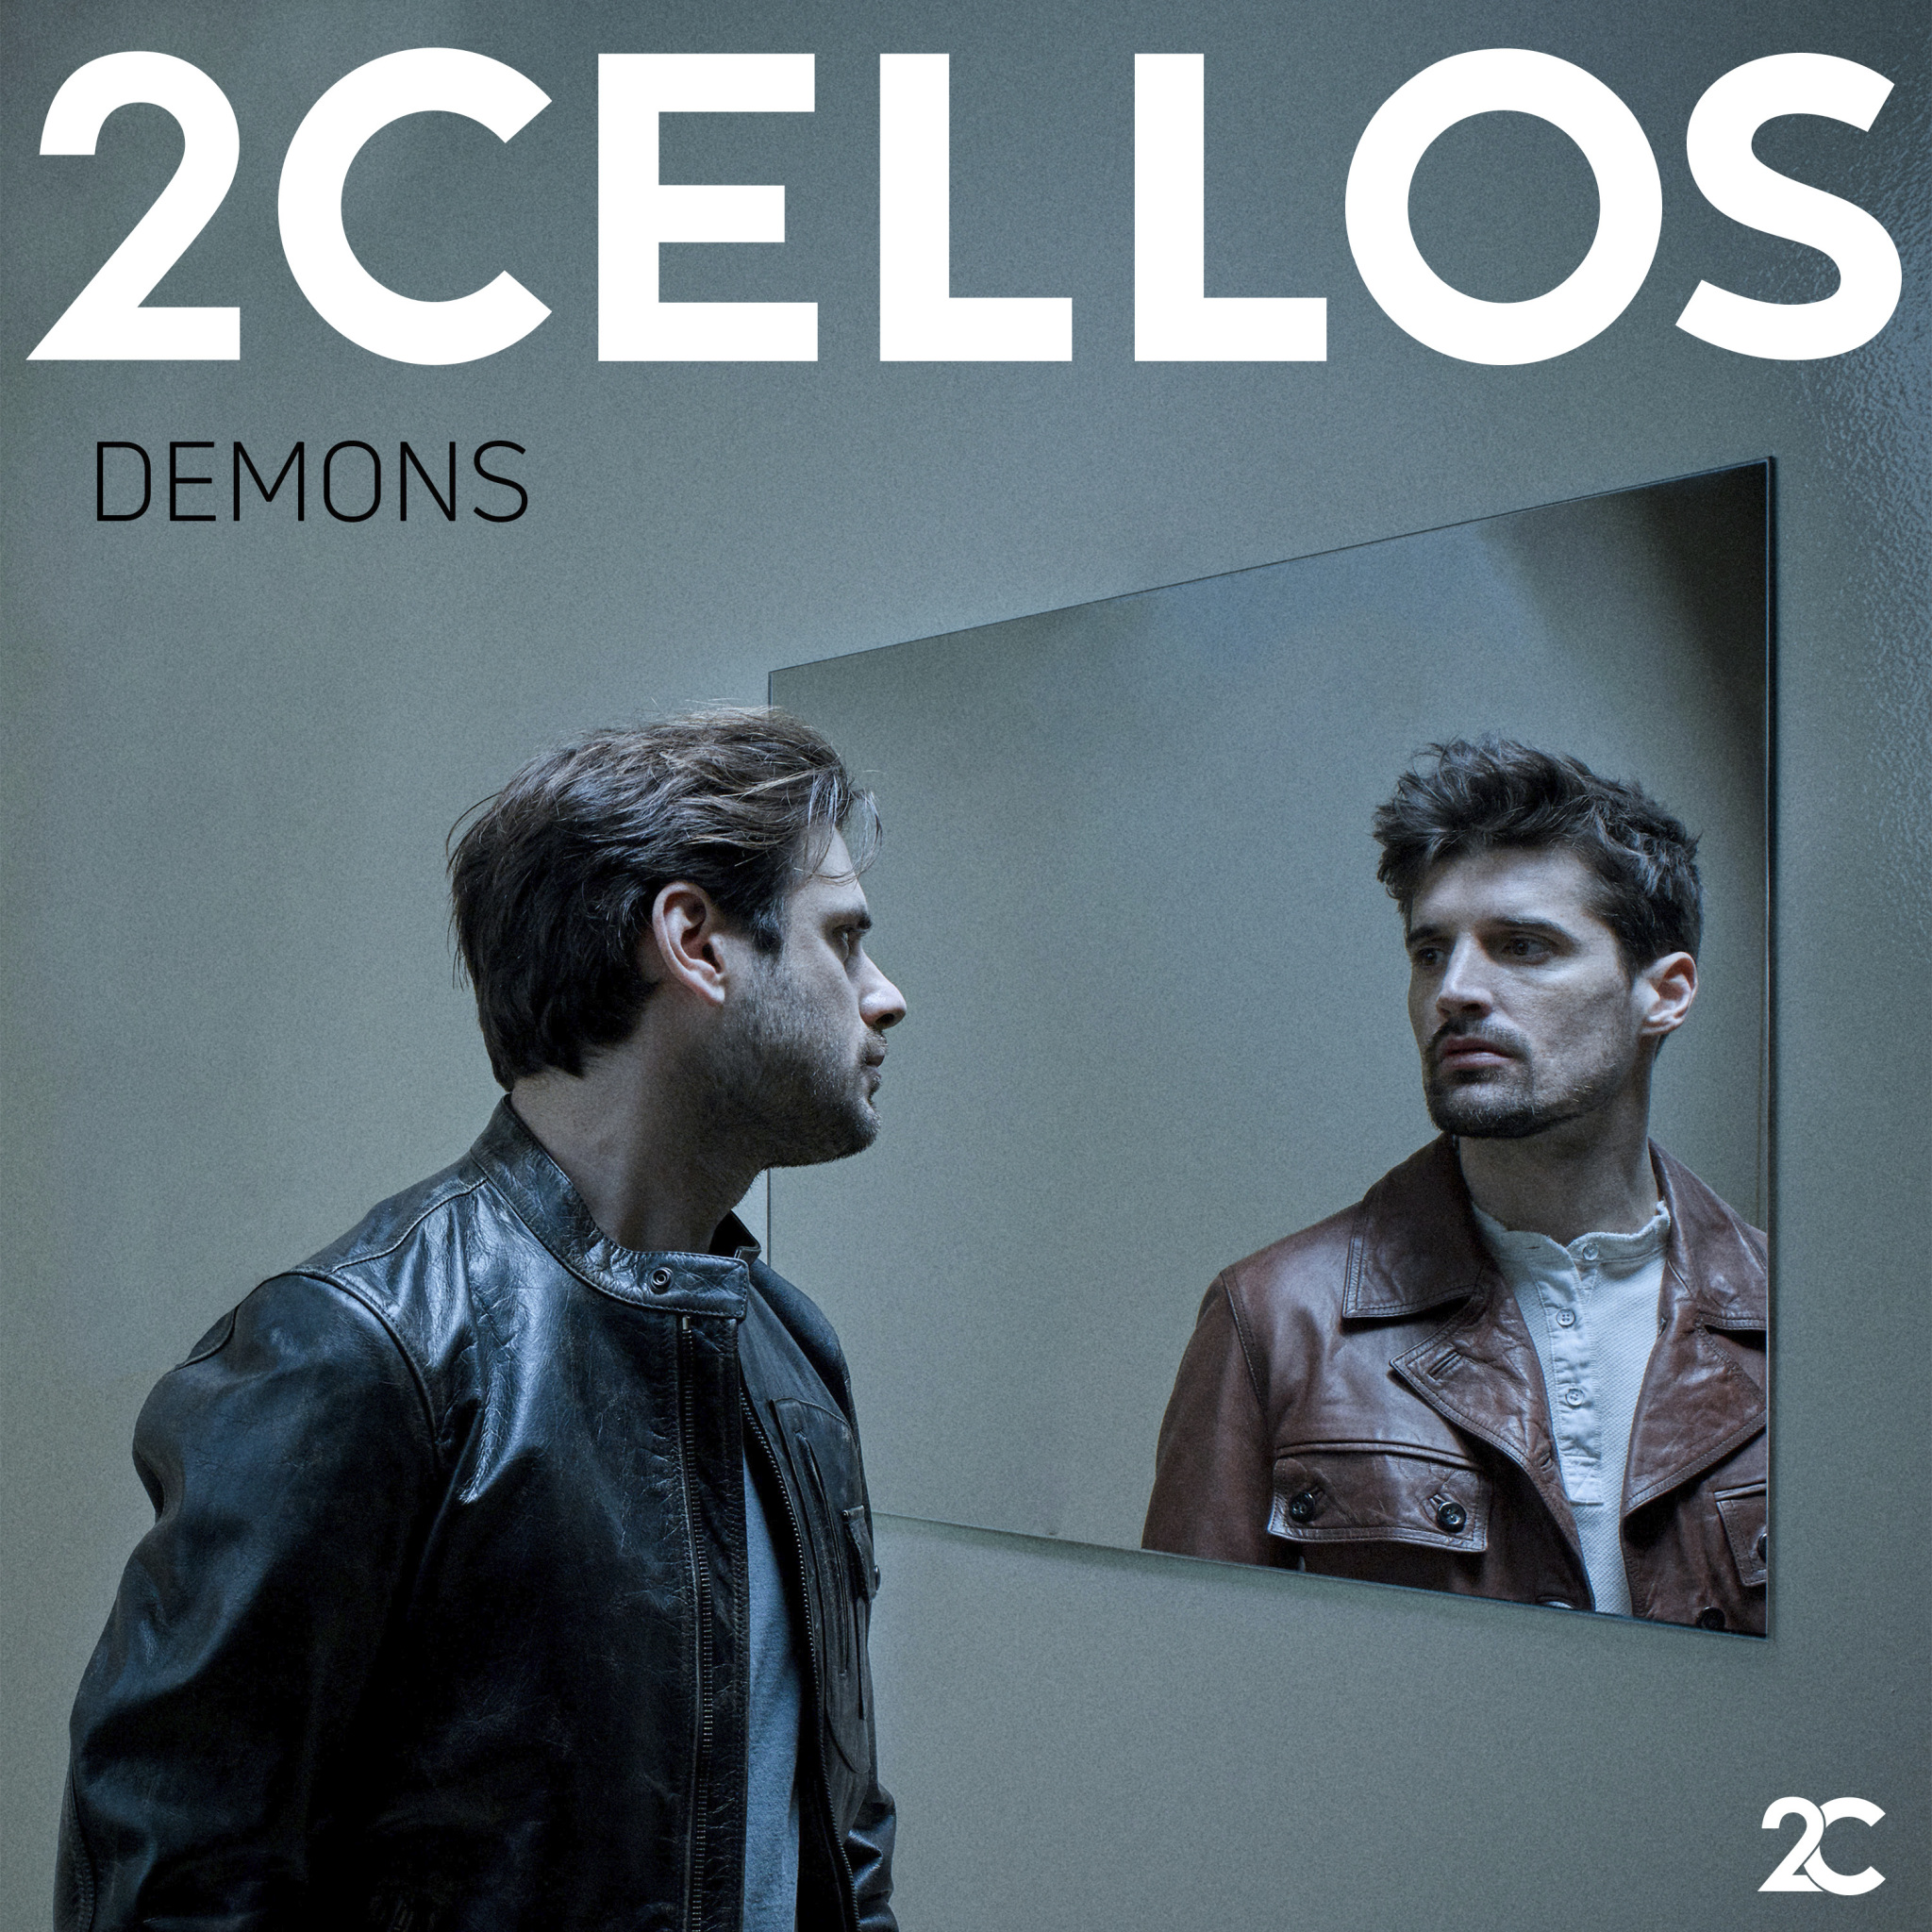 2cellos release new song demons